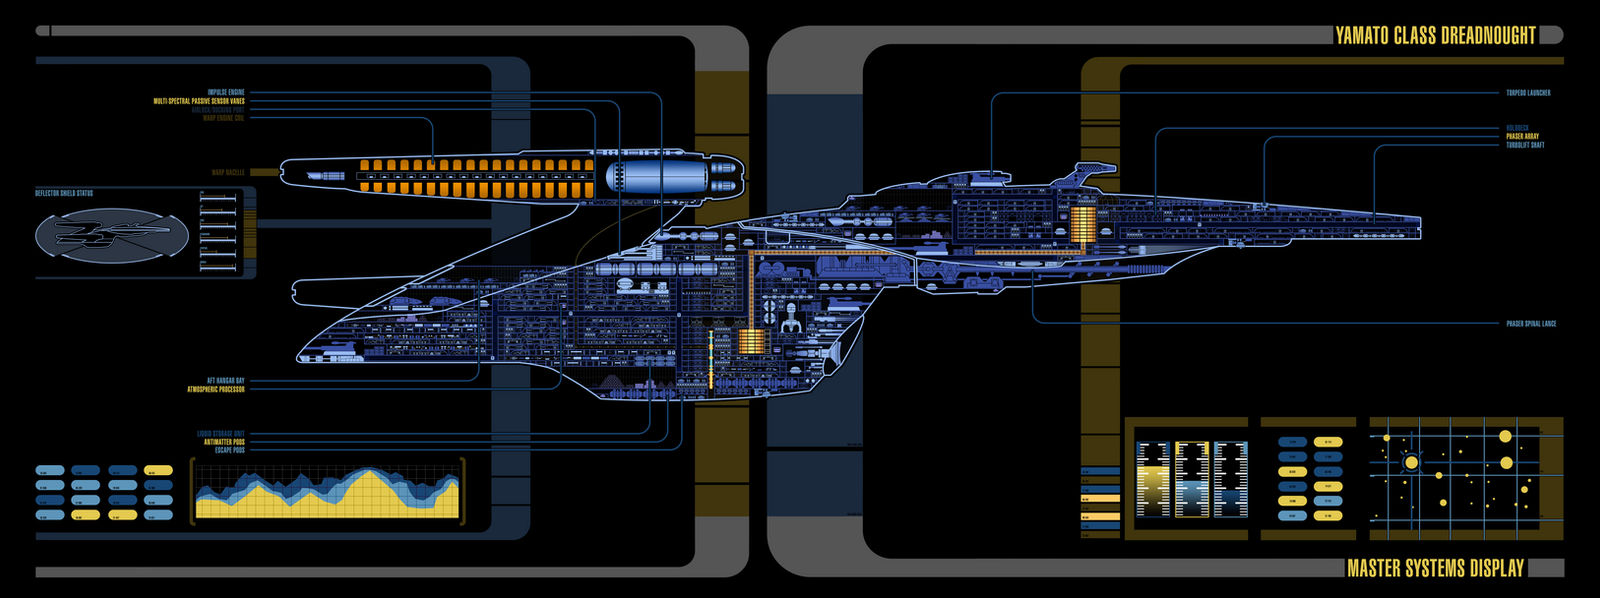 Yamato Class Dreadnought MSD by h31180y on DeviantArt